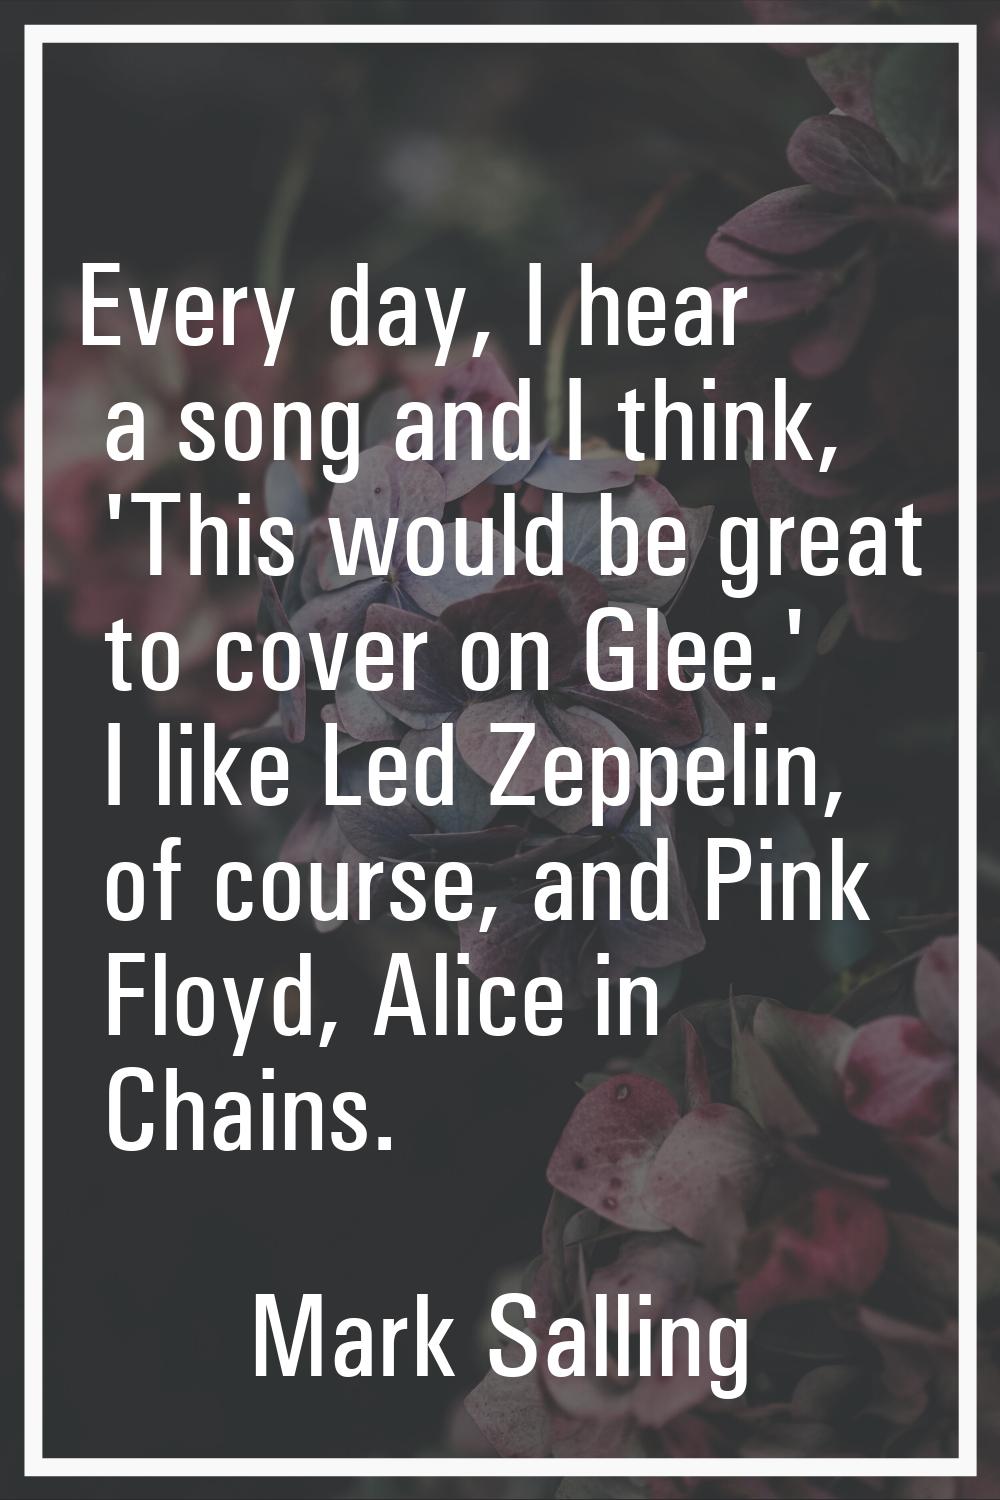 Every day, I hear a song and I think, 'This would be great to cover on Glee.' I like Led Zeppelin, 